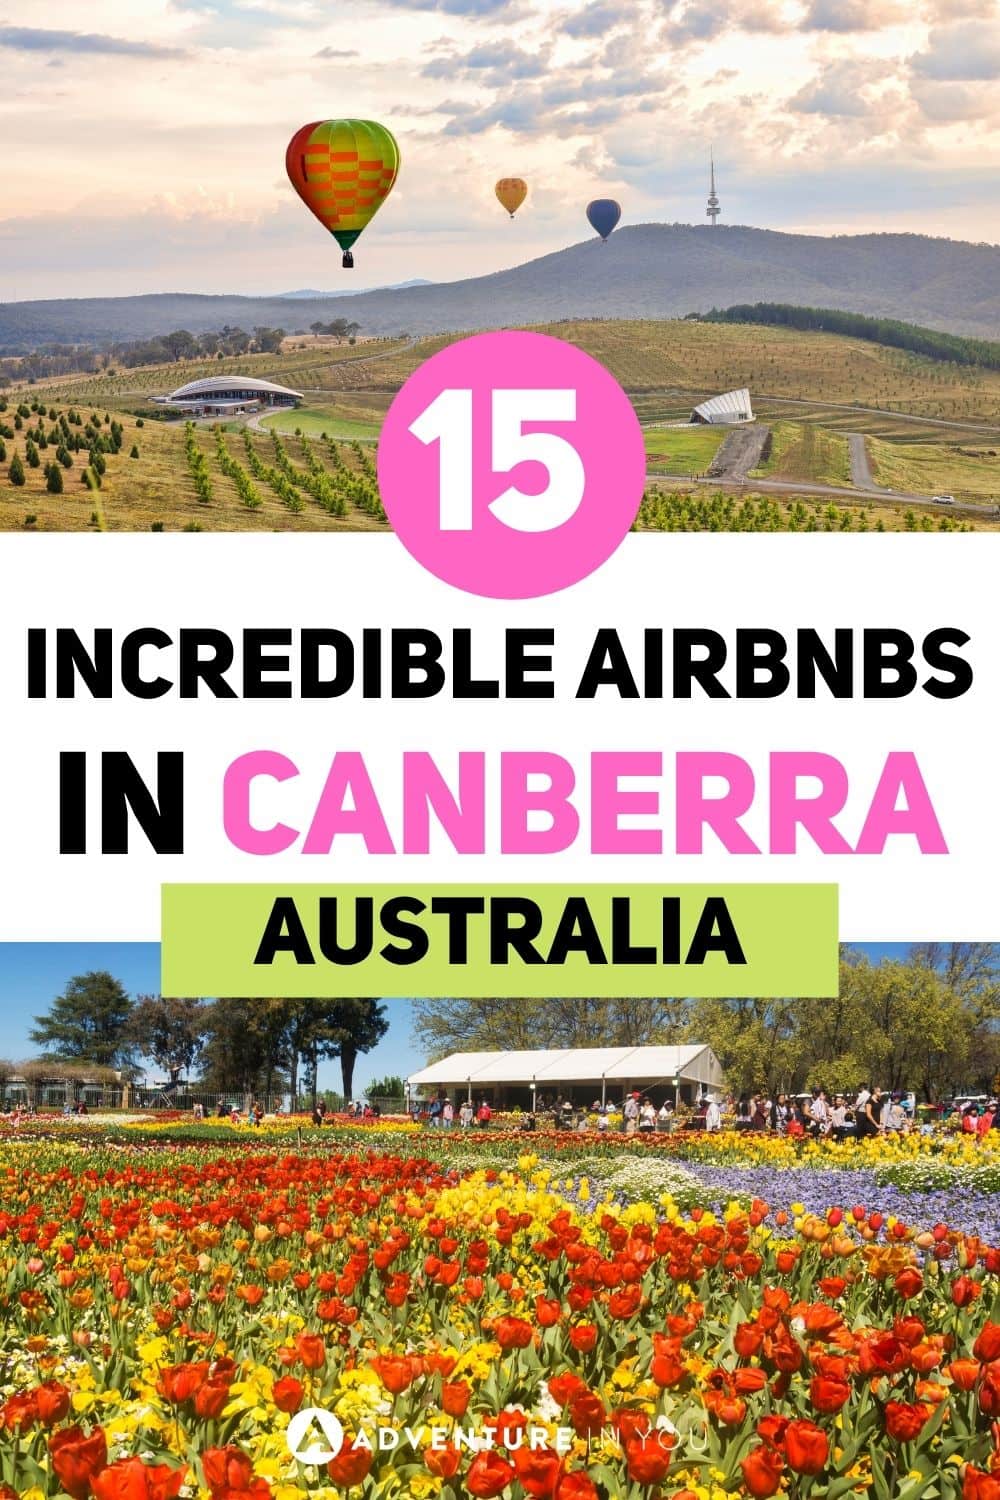 Airbnbs in Canberra | Looking for the best Airbnbs in Canberra Click here to see our top picks. #australia #canberra #wheretostayincanberra